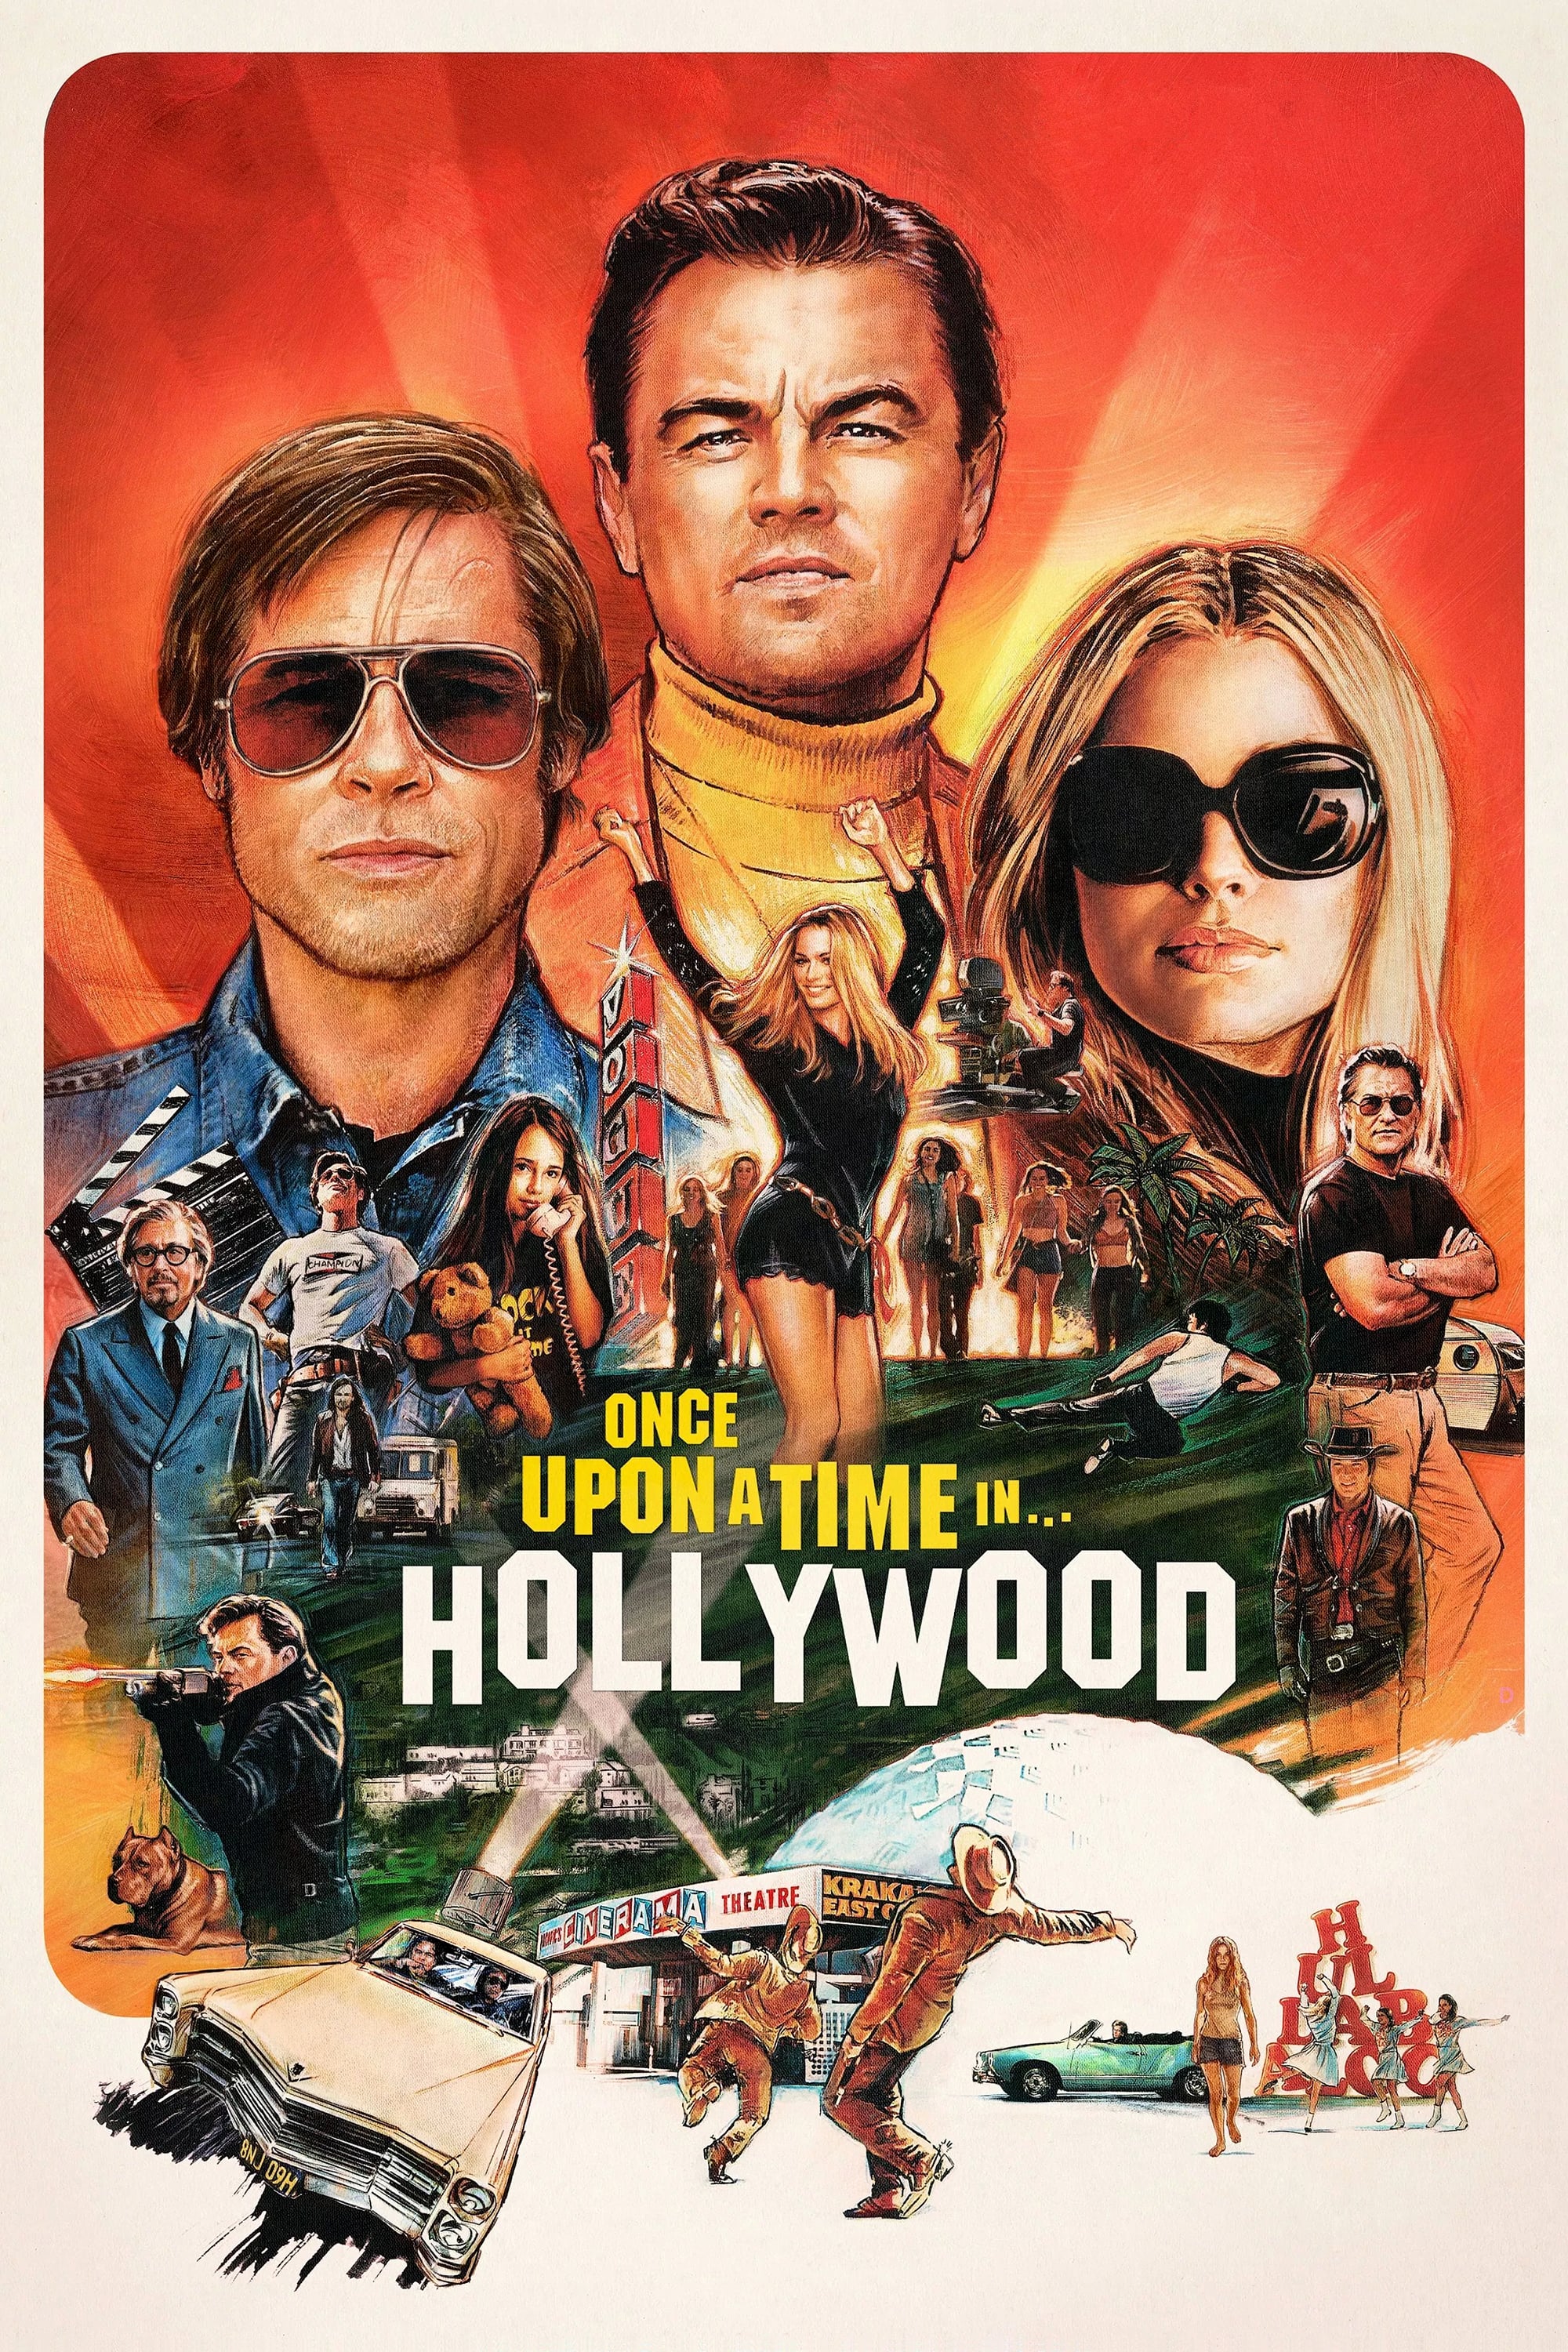 Plakat von "Once Upon a Time in Hollywood"